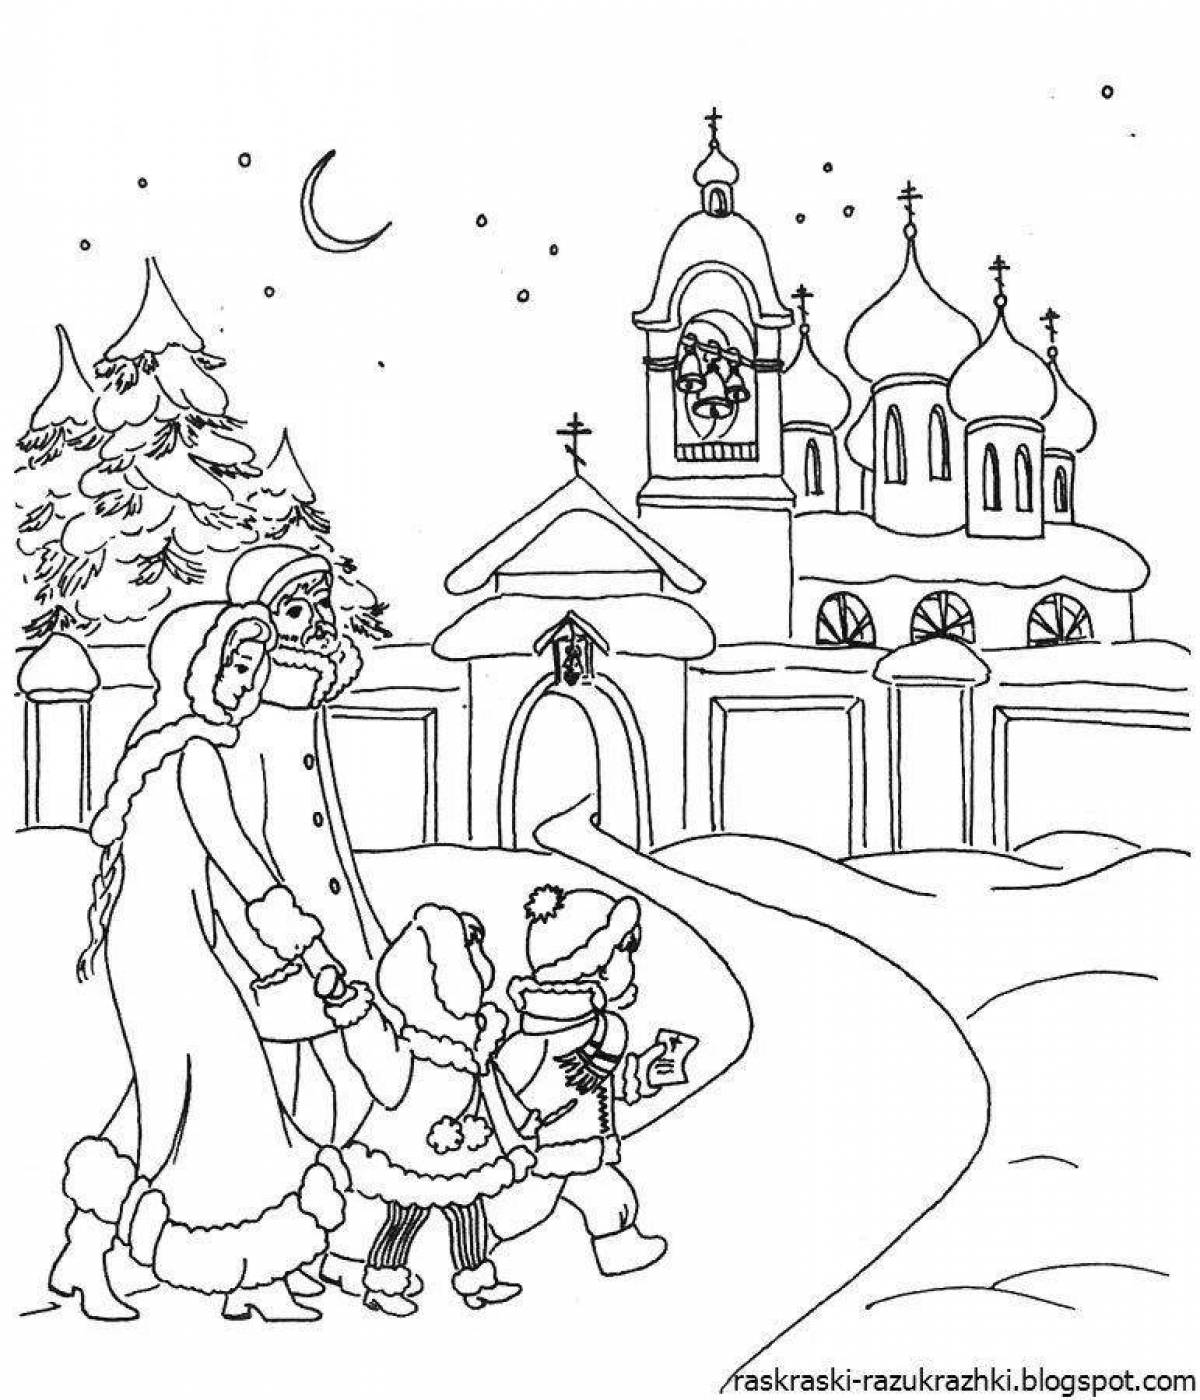 Christmas playful coloring for children orthodoxy